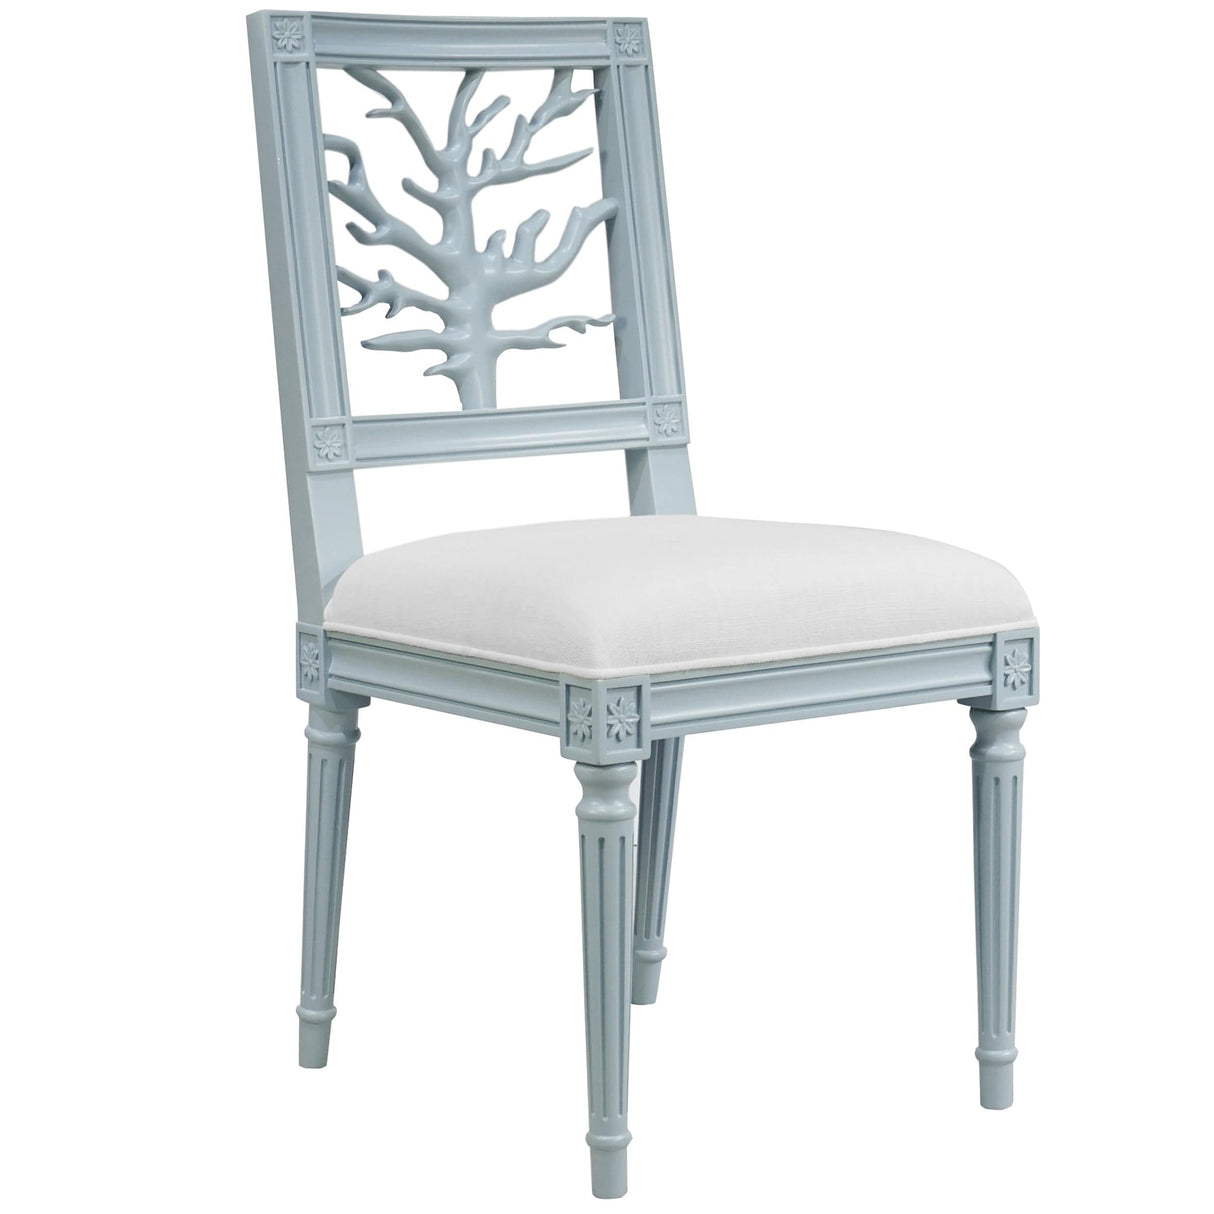 Worlds Away Mckay Dining Chair Furniture worlds-away-MCKAY LB